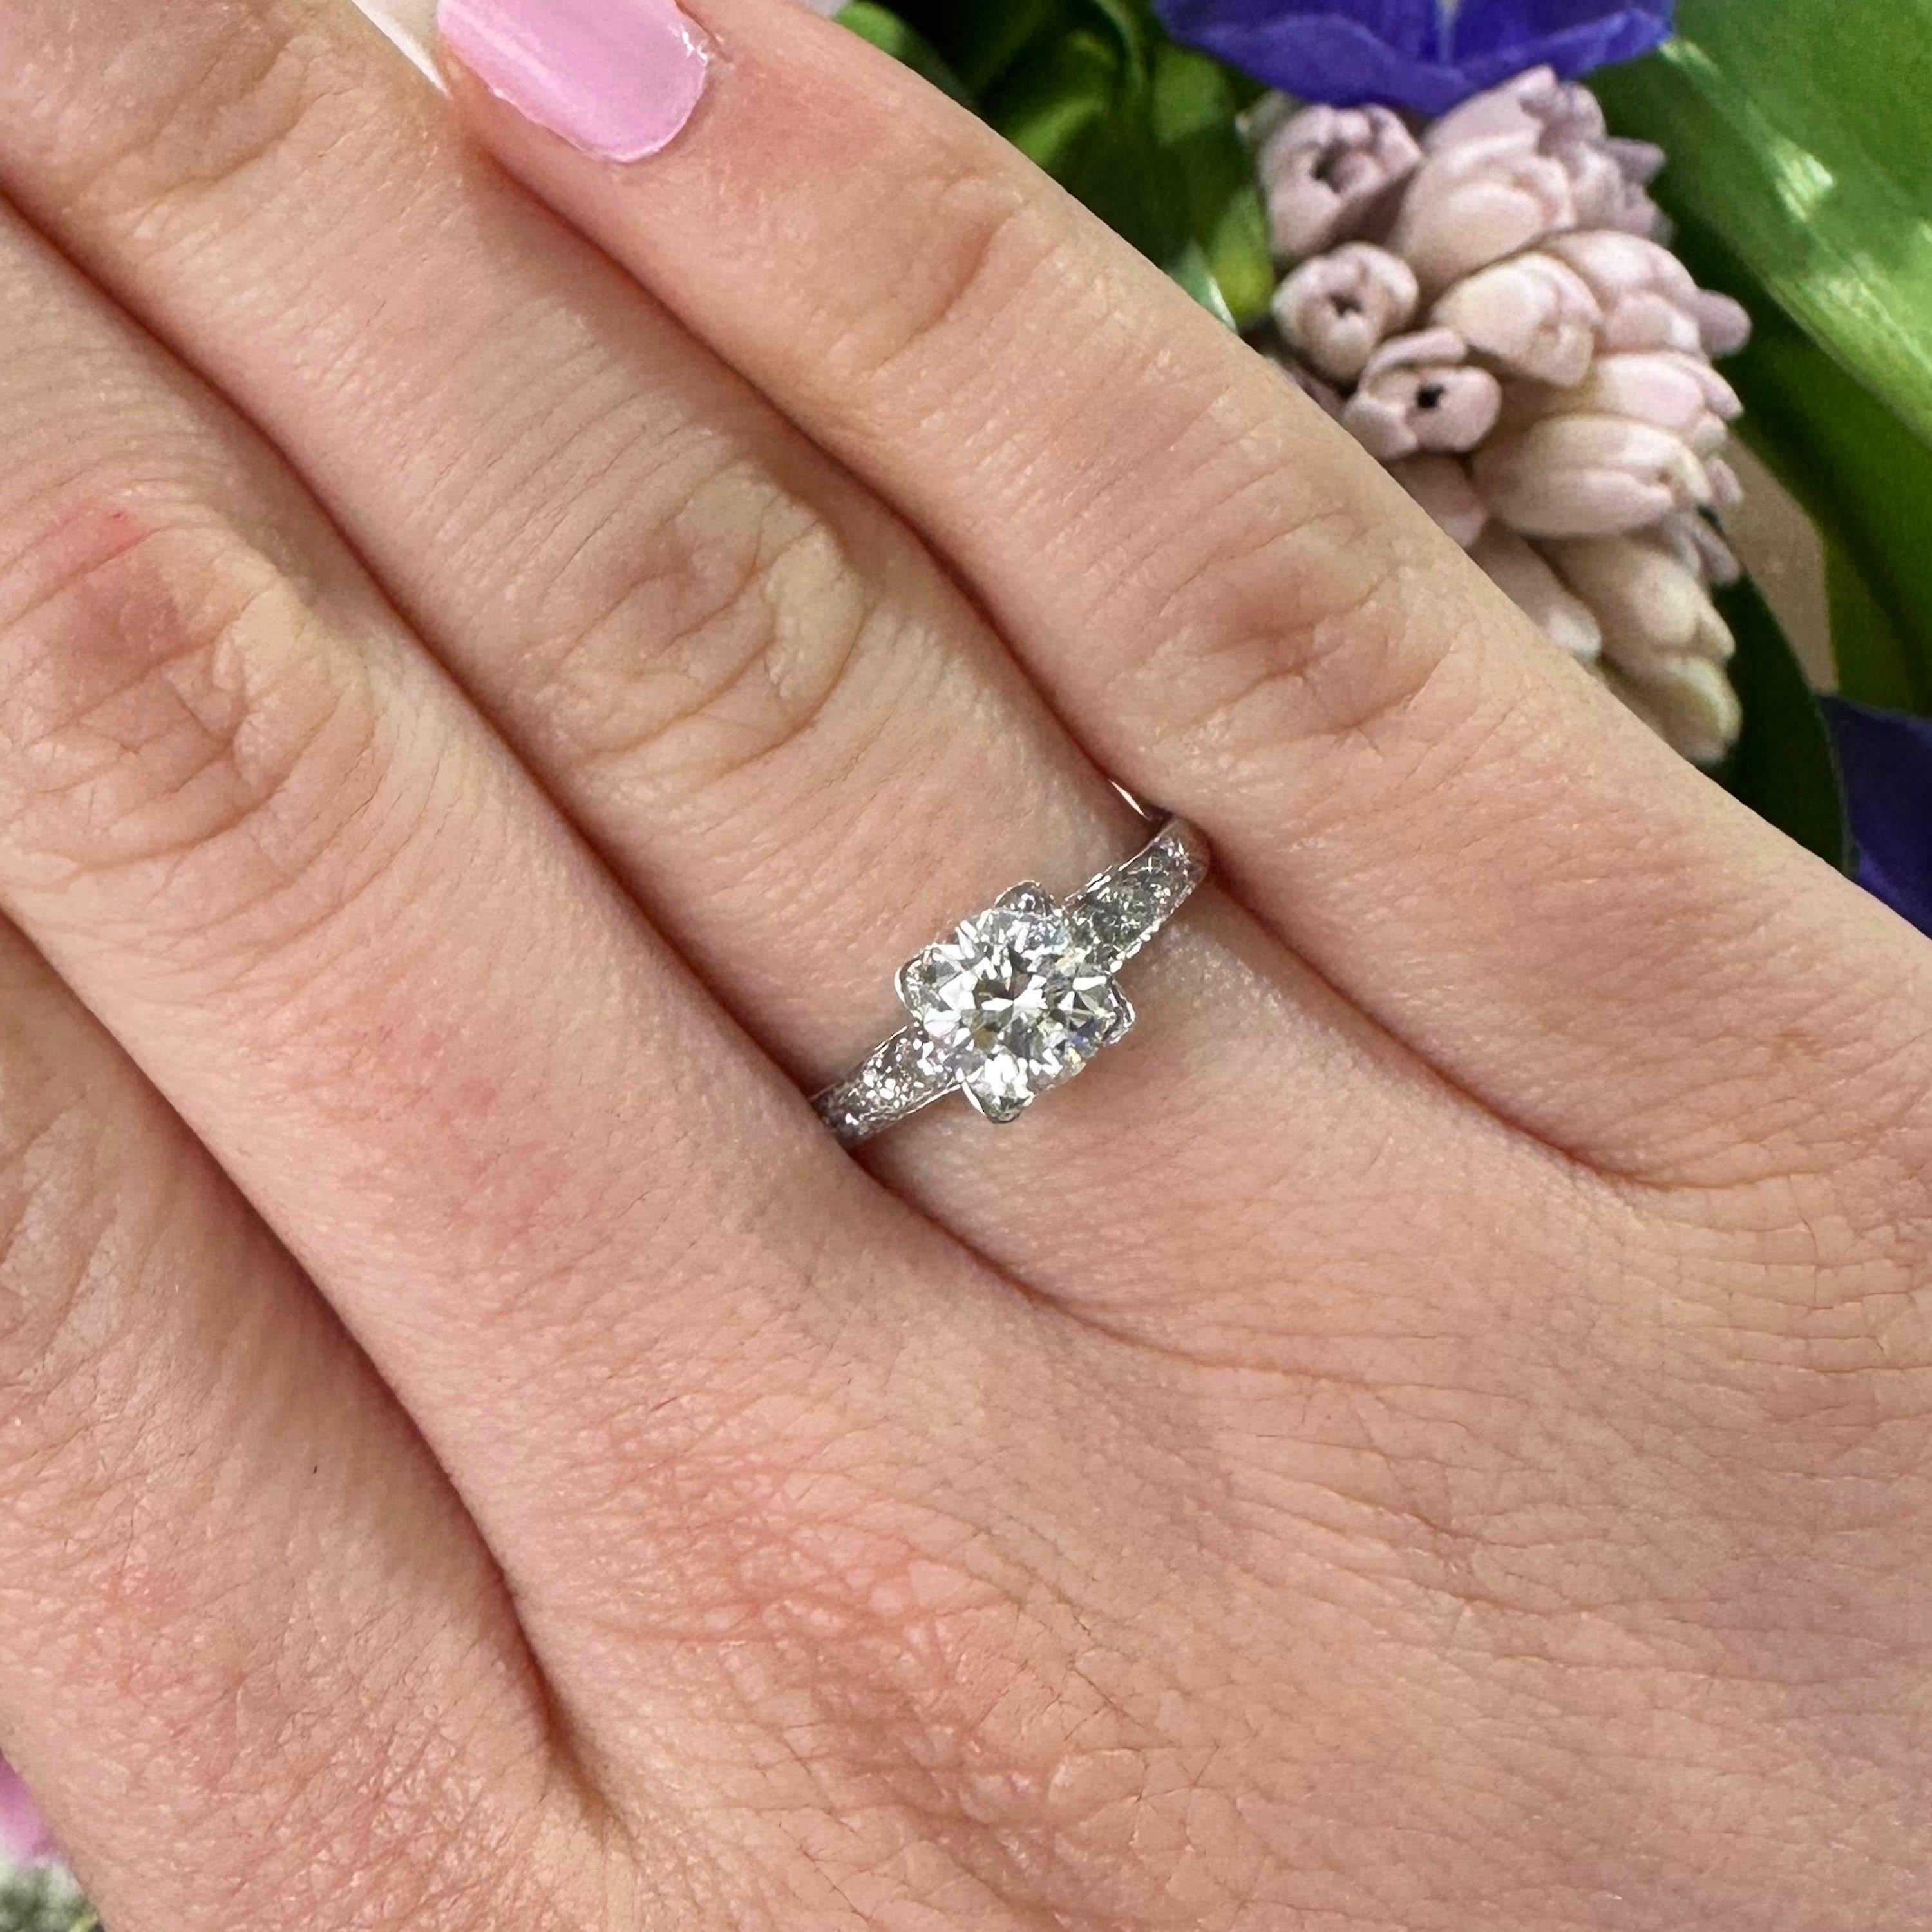 An American vintage diamond ring, set with a round brilliant cut diamond, weighing 1.01ct, G colour, VVS2 clarity, with three eight-cut diamonds set in each shoulder, mounted in platinum.

Finger size UK L ½ / US 5 7/8.